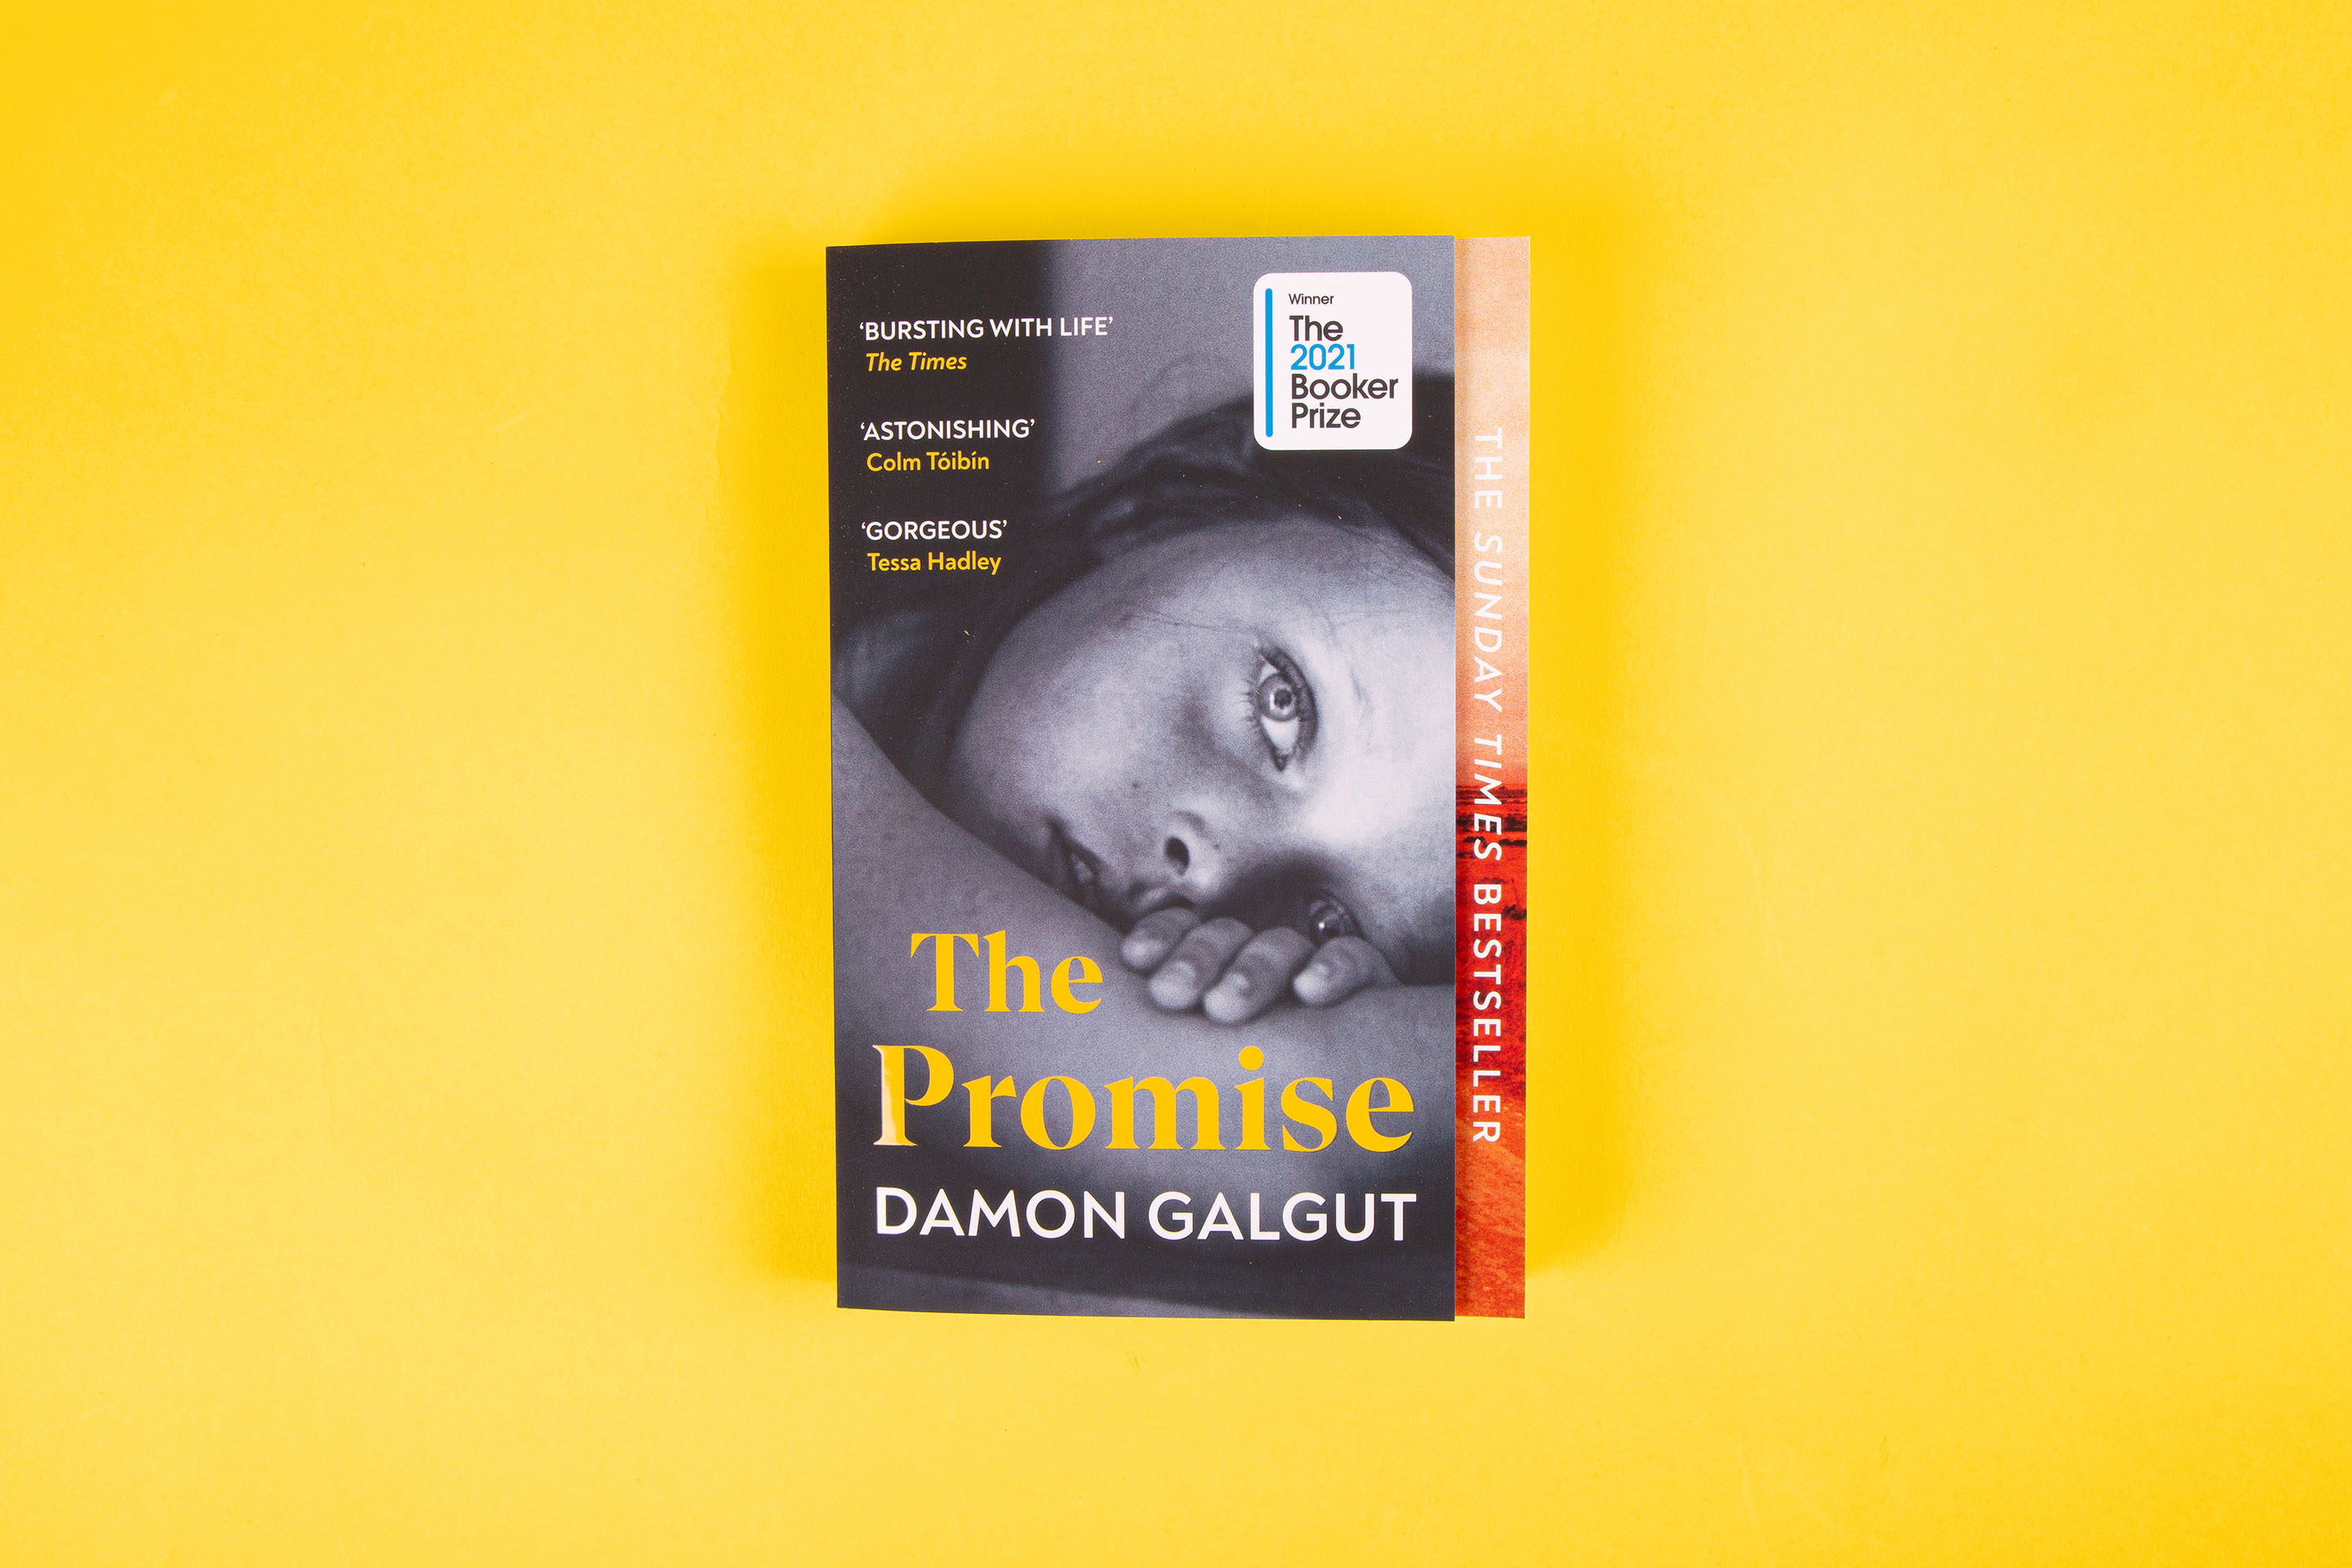 The Promise by Damon Galgut, photographed against a yellow background.